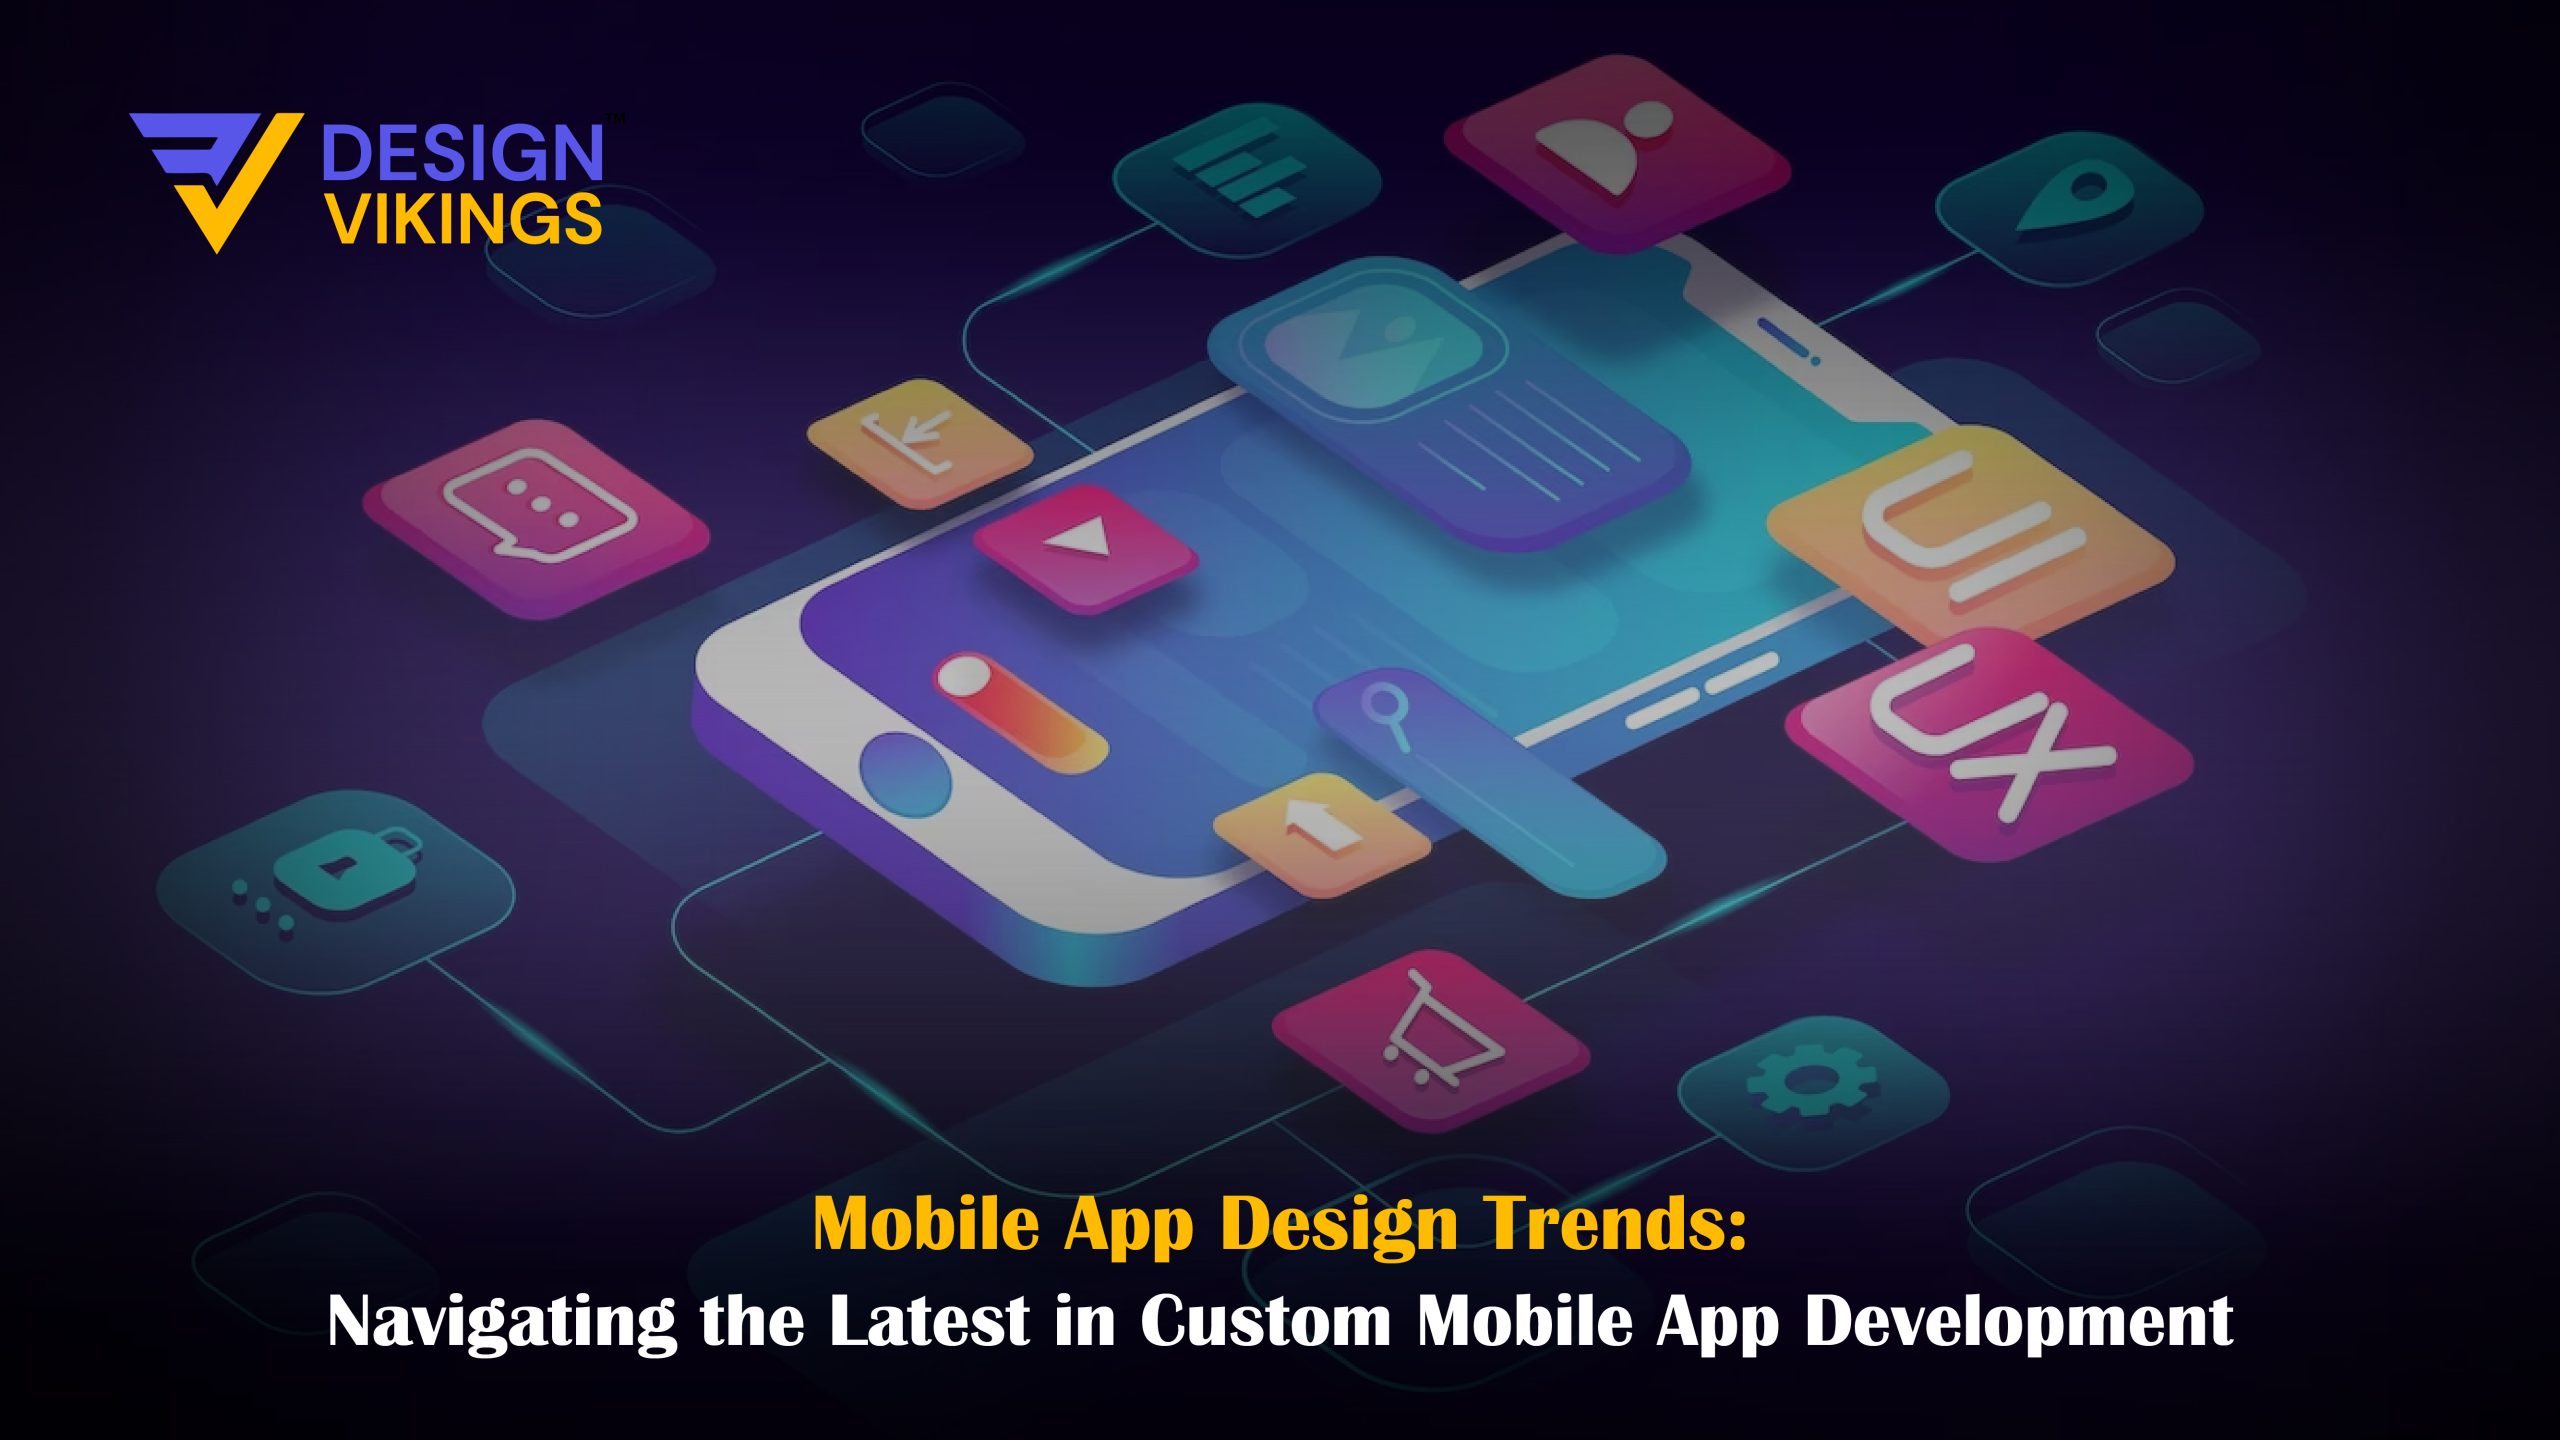 The top and latest mobile app design trends for custom apps.